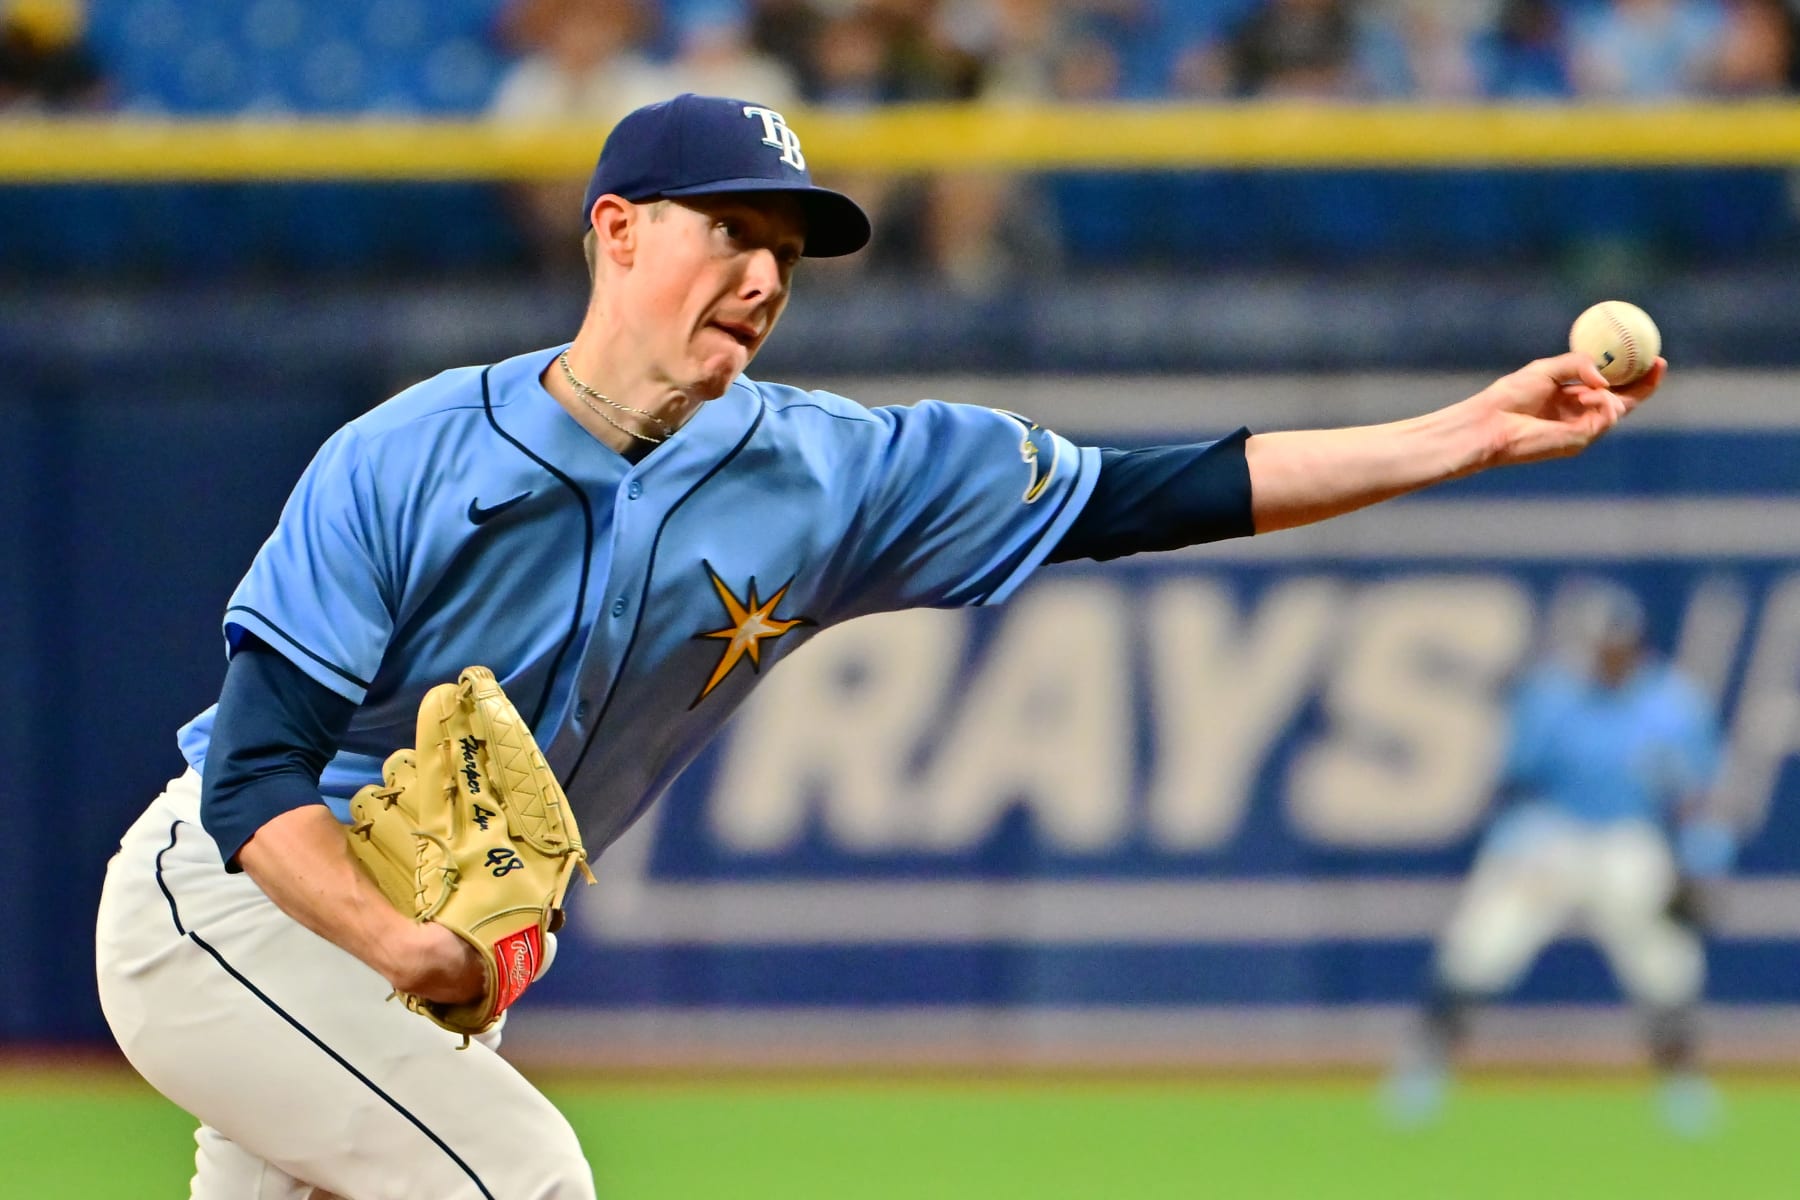 Red-hot Rays look at Wil Myers and wonder, is he another Longoria